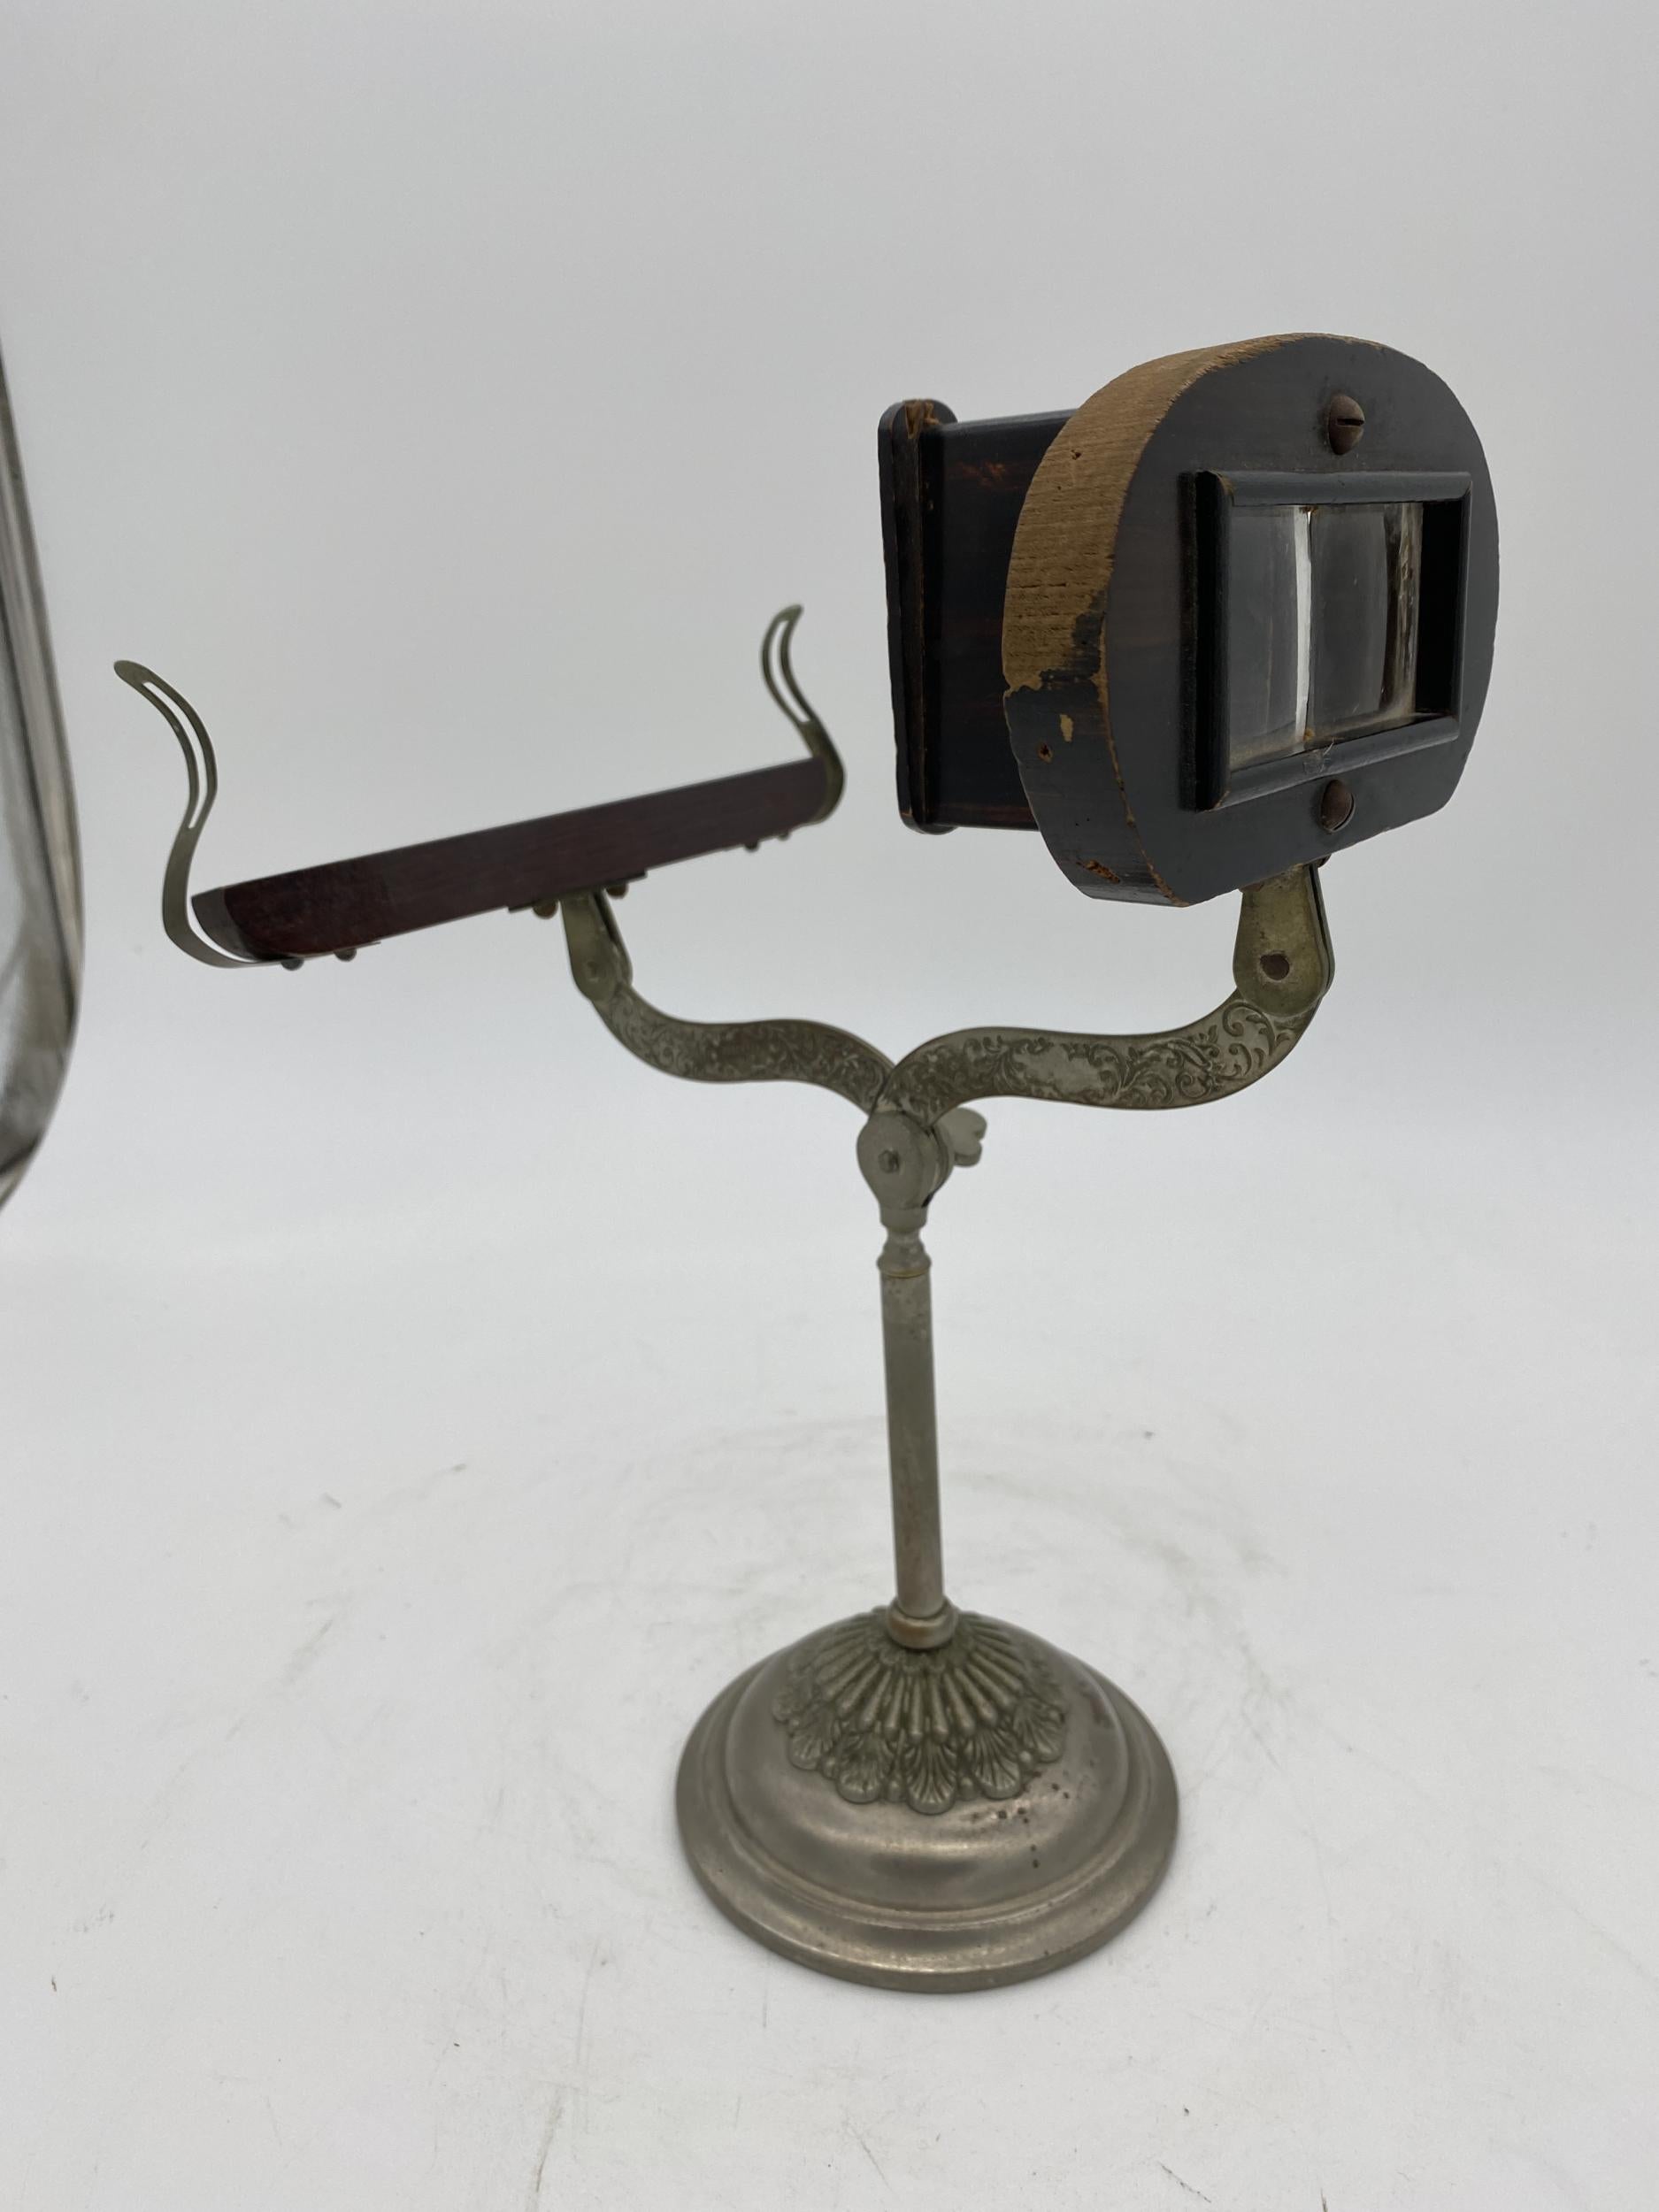 Rare decorative table top Stereo-Graphoscope Stereo Viewer with spelter metal base and wood viewing frame.

Circa 1889.